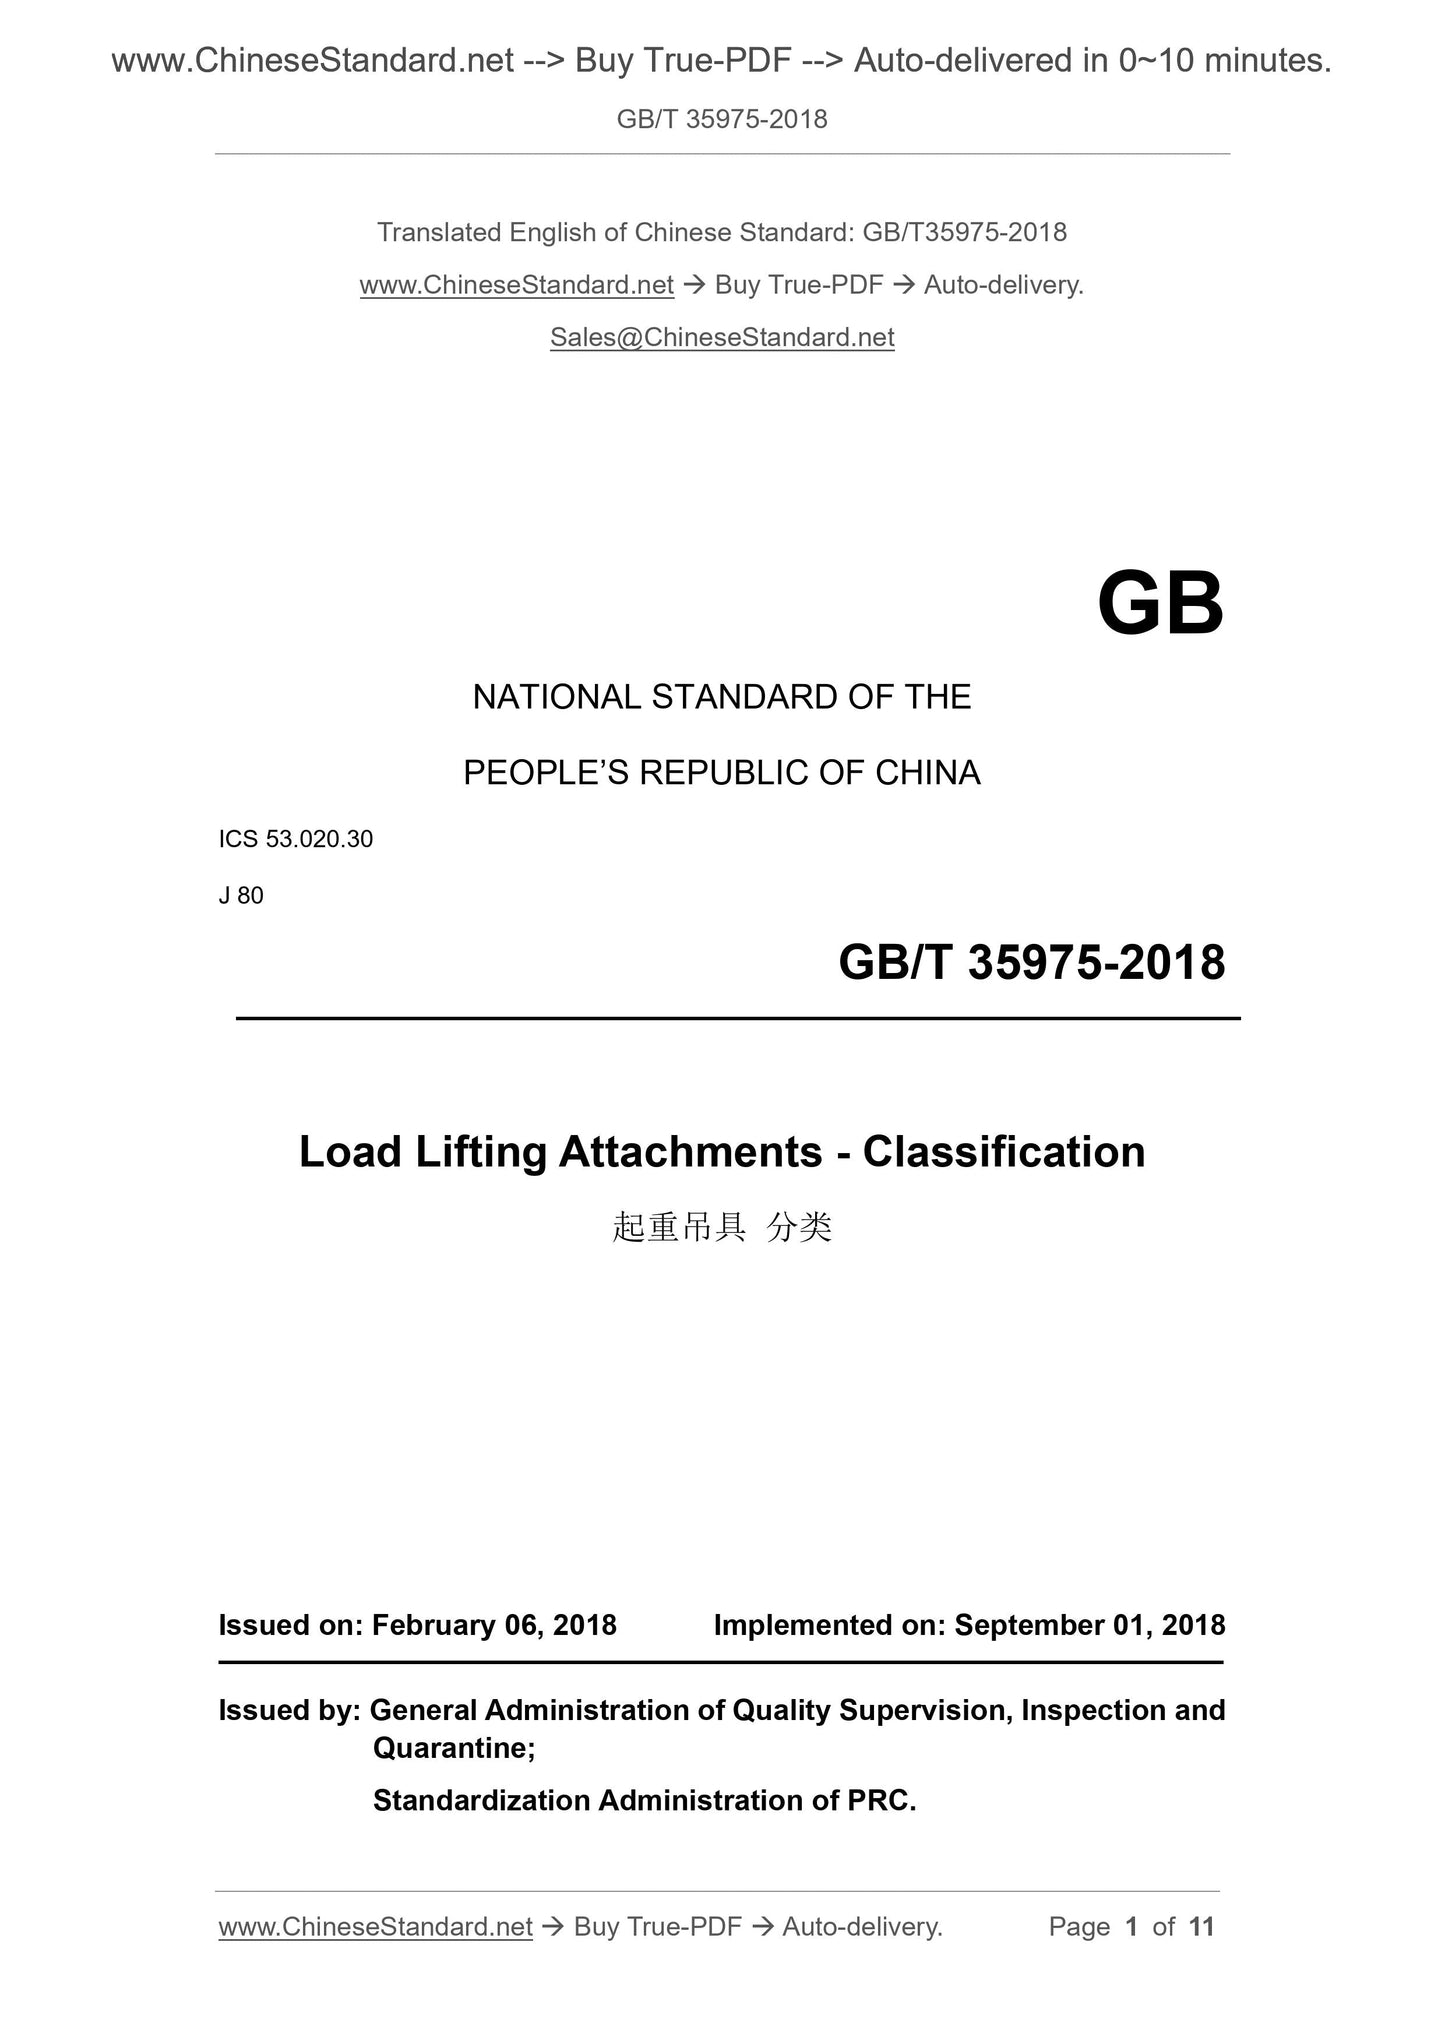 GB/T 35975-2018 Page 1